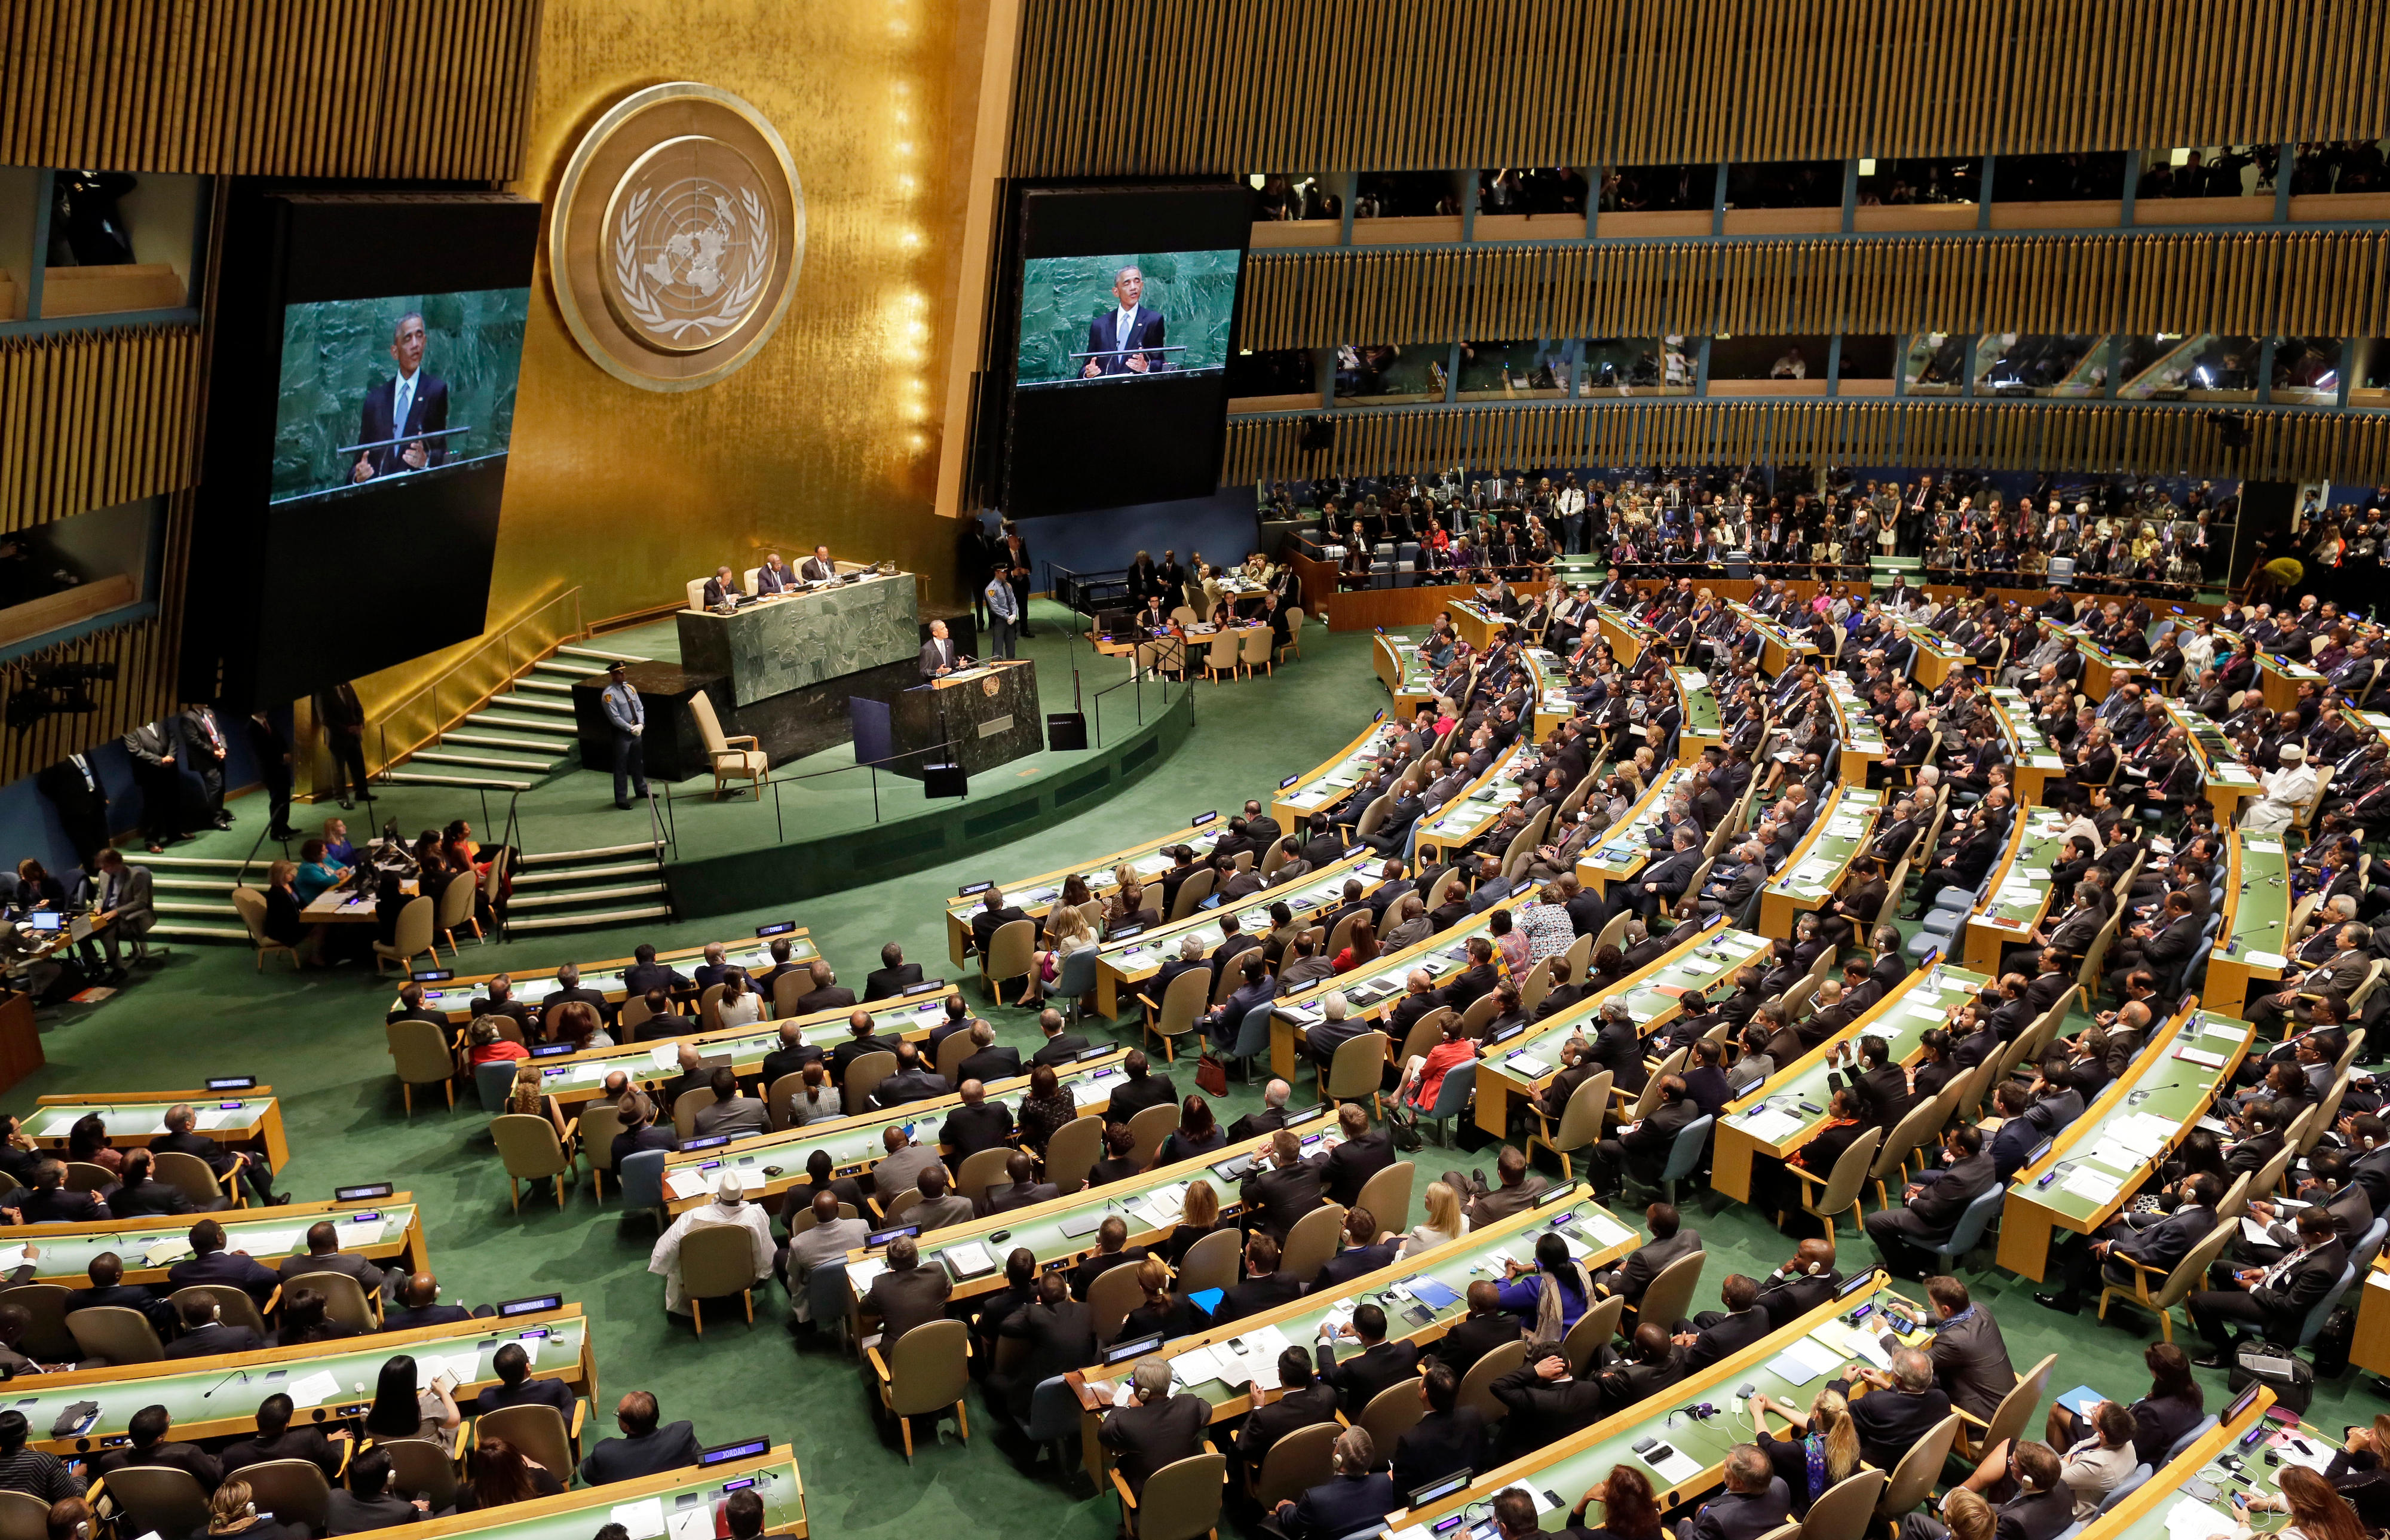 General assembly of the United Nations in New York